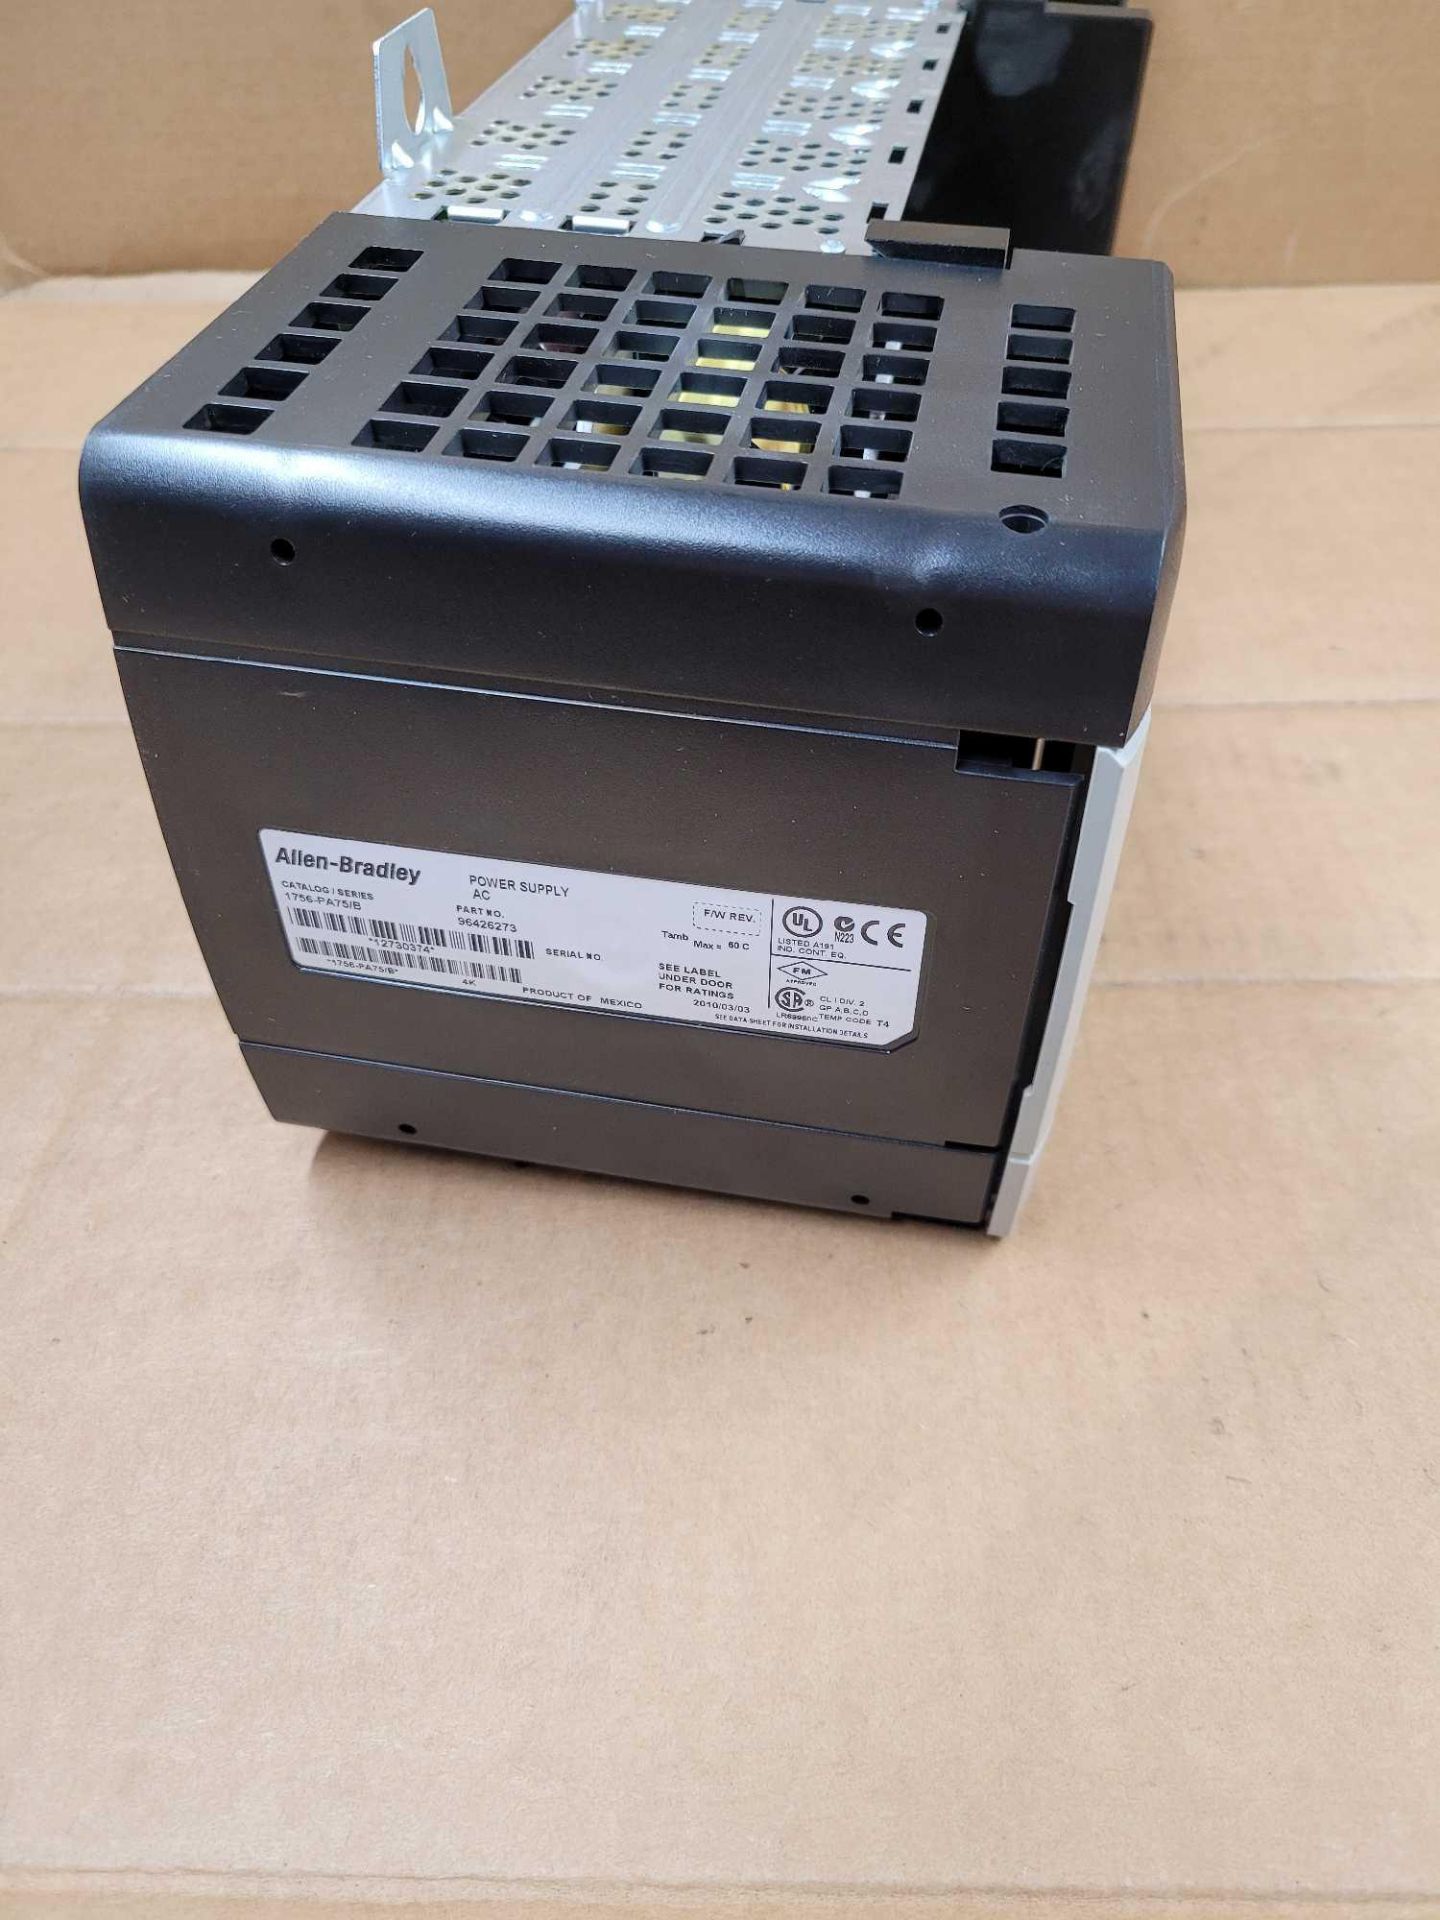 ALLEN BRADLEY 1756-PA75/B with 1756-A10  /  Series B Power Supply with Series B 10 Slot Chassis  / - Image 10 of 12